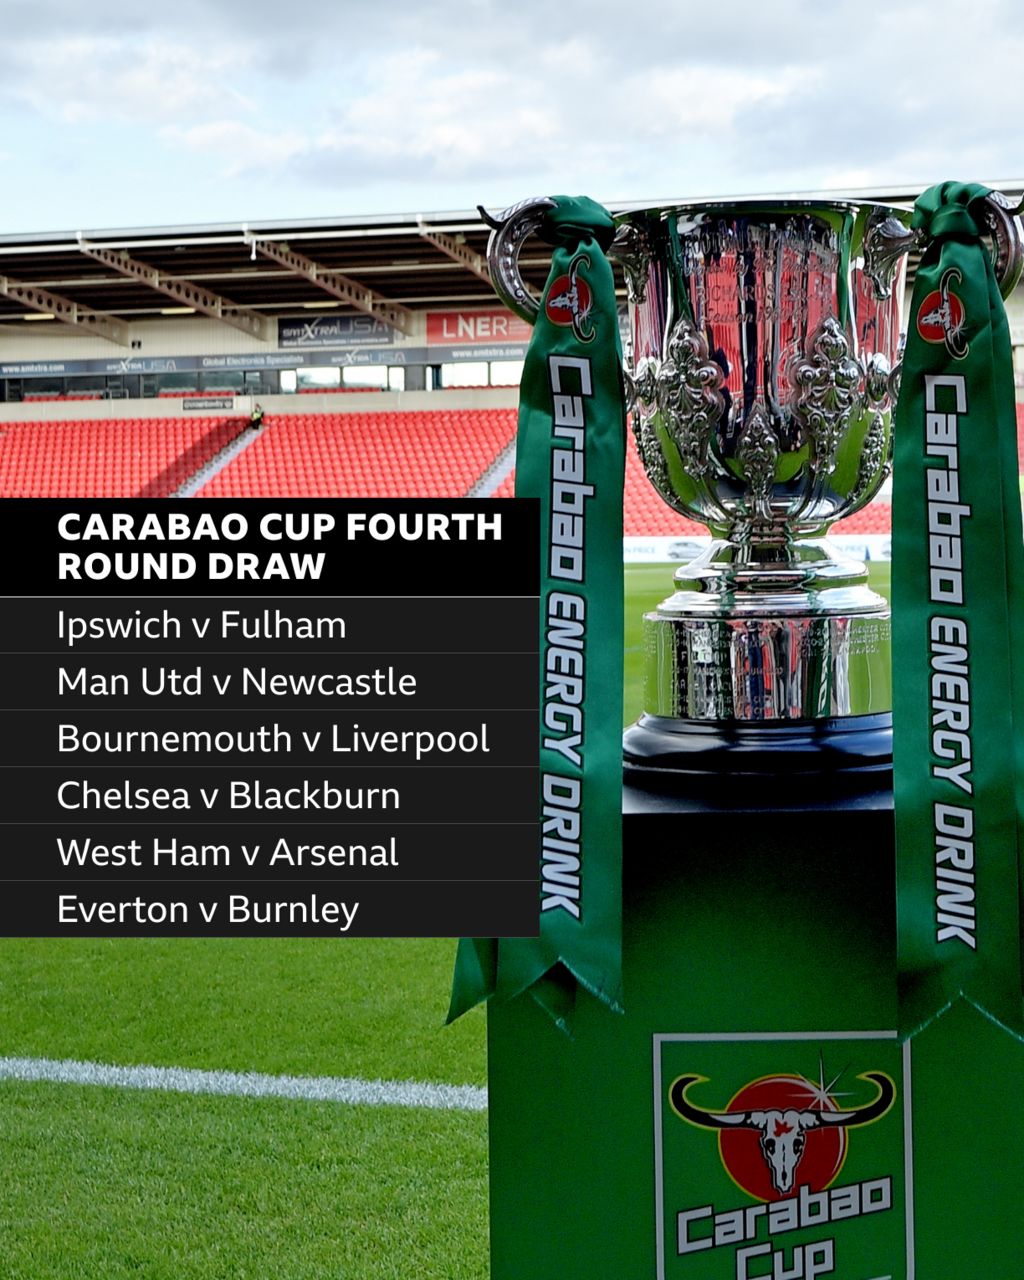 EFL apologises for Carabao Cup draw | Football News | Sky Sports